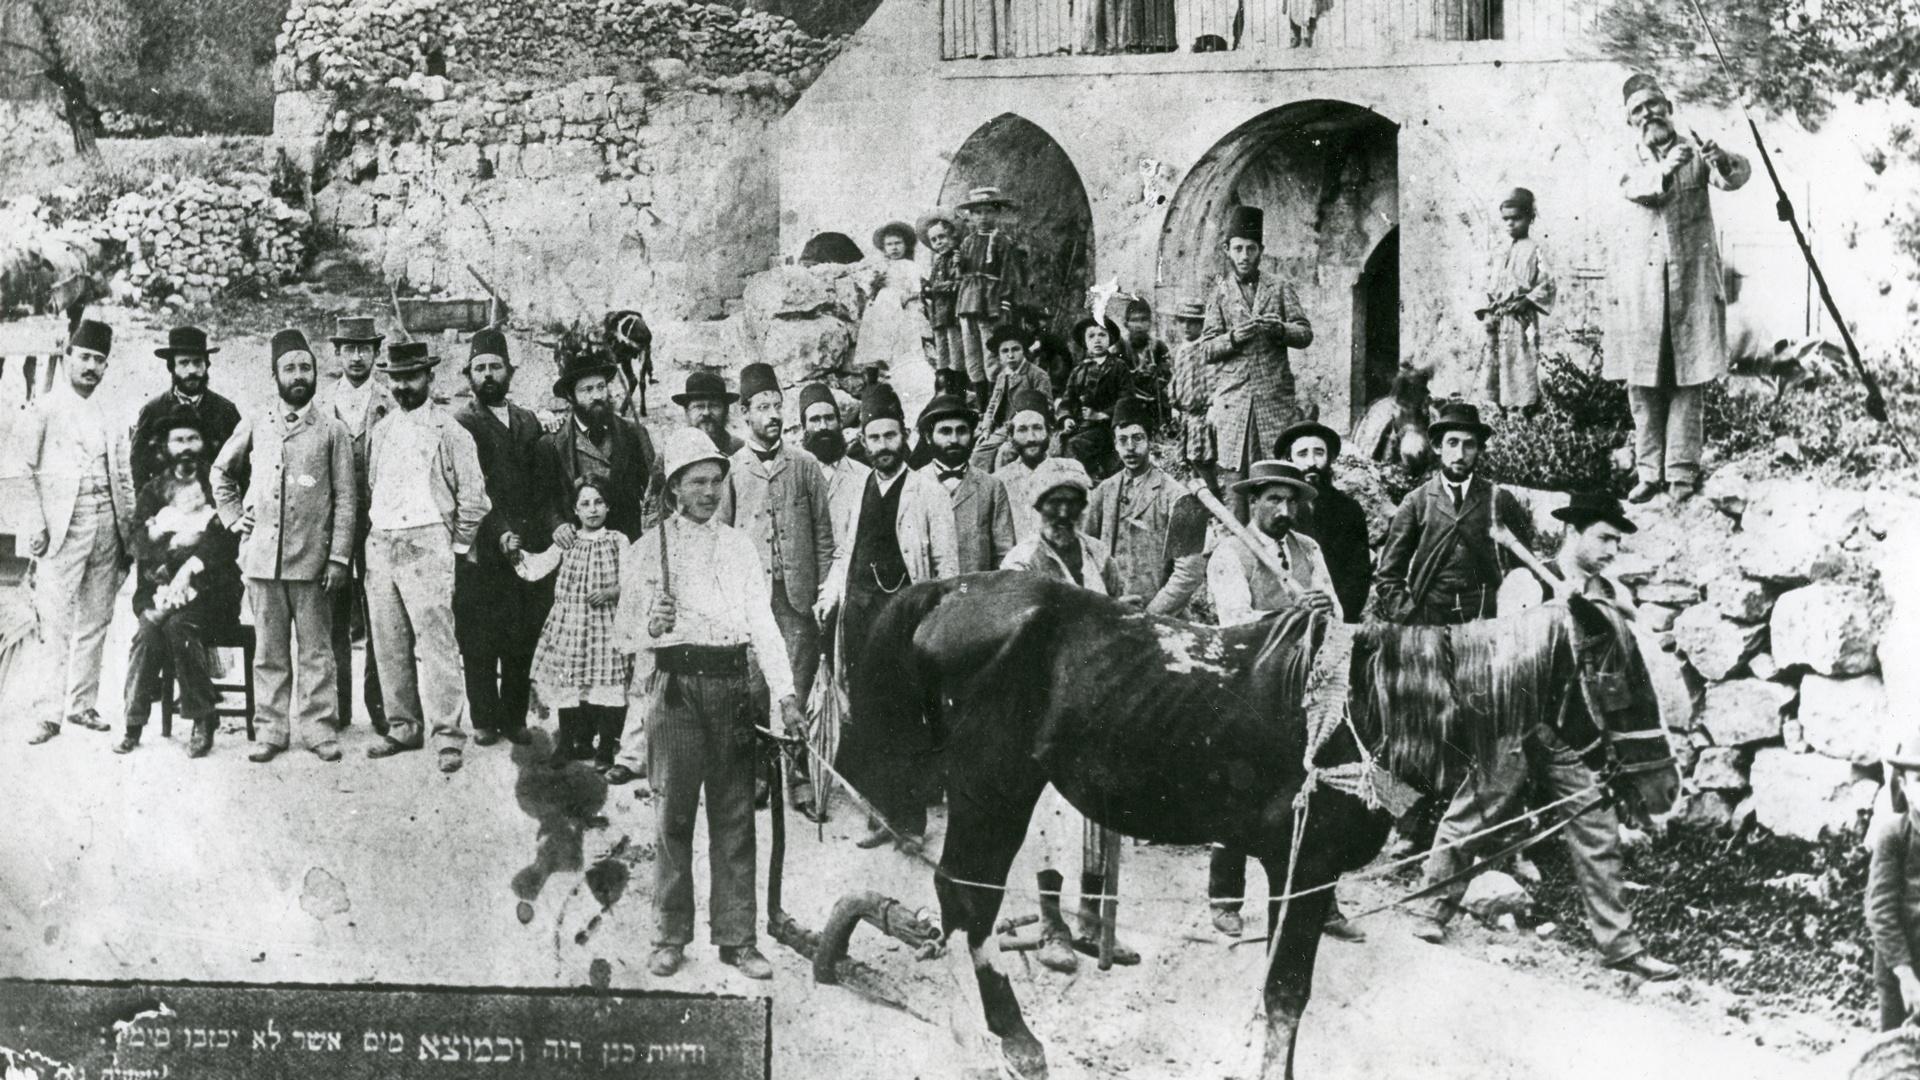 There was a delicate cultural balance between Ottoman Jews, Christians, and Muslims in Palestine.